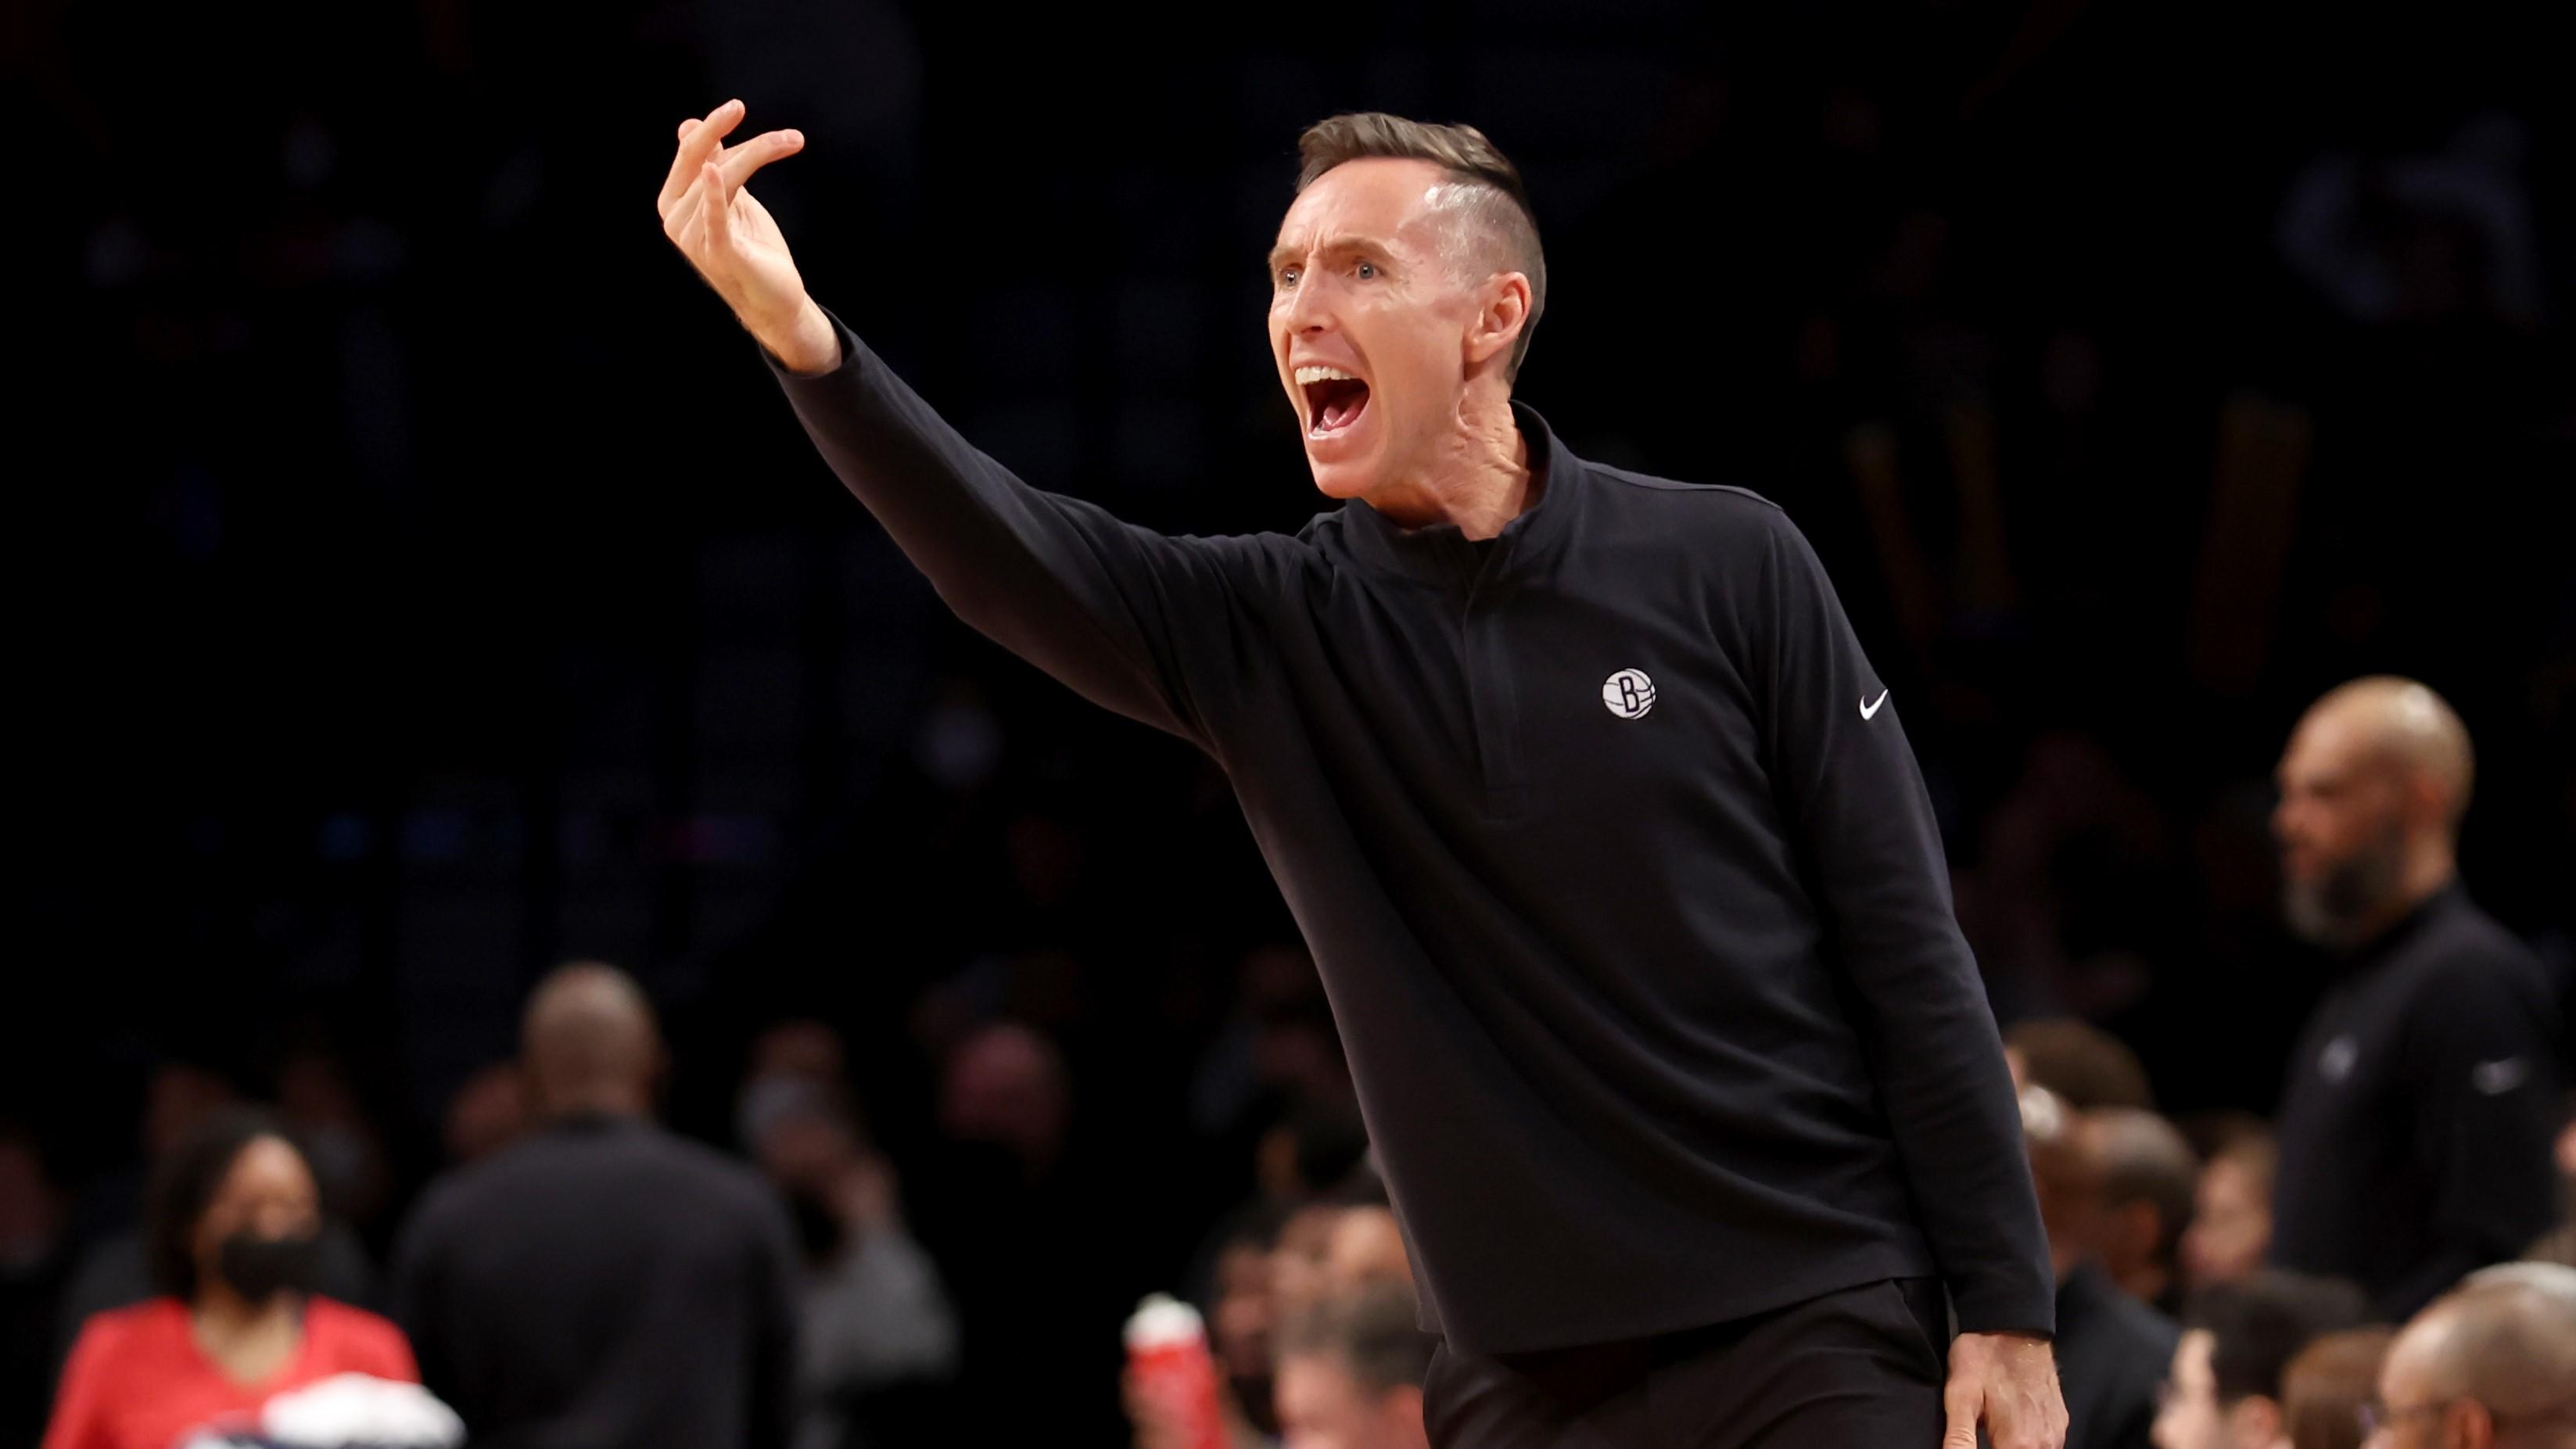 Brooklyn Nets head coach Steve Nash coaches against the Cleveland Cavaliers during the third quarter at Barclays Center. / Brad Penner-USA TODAY Sports